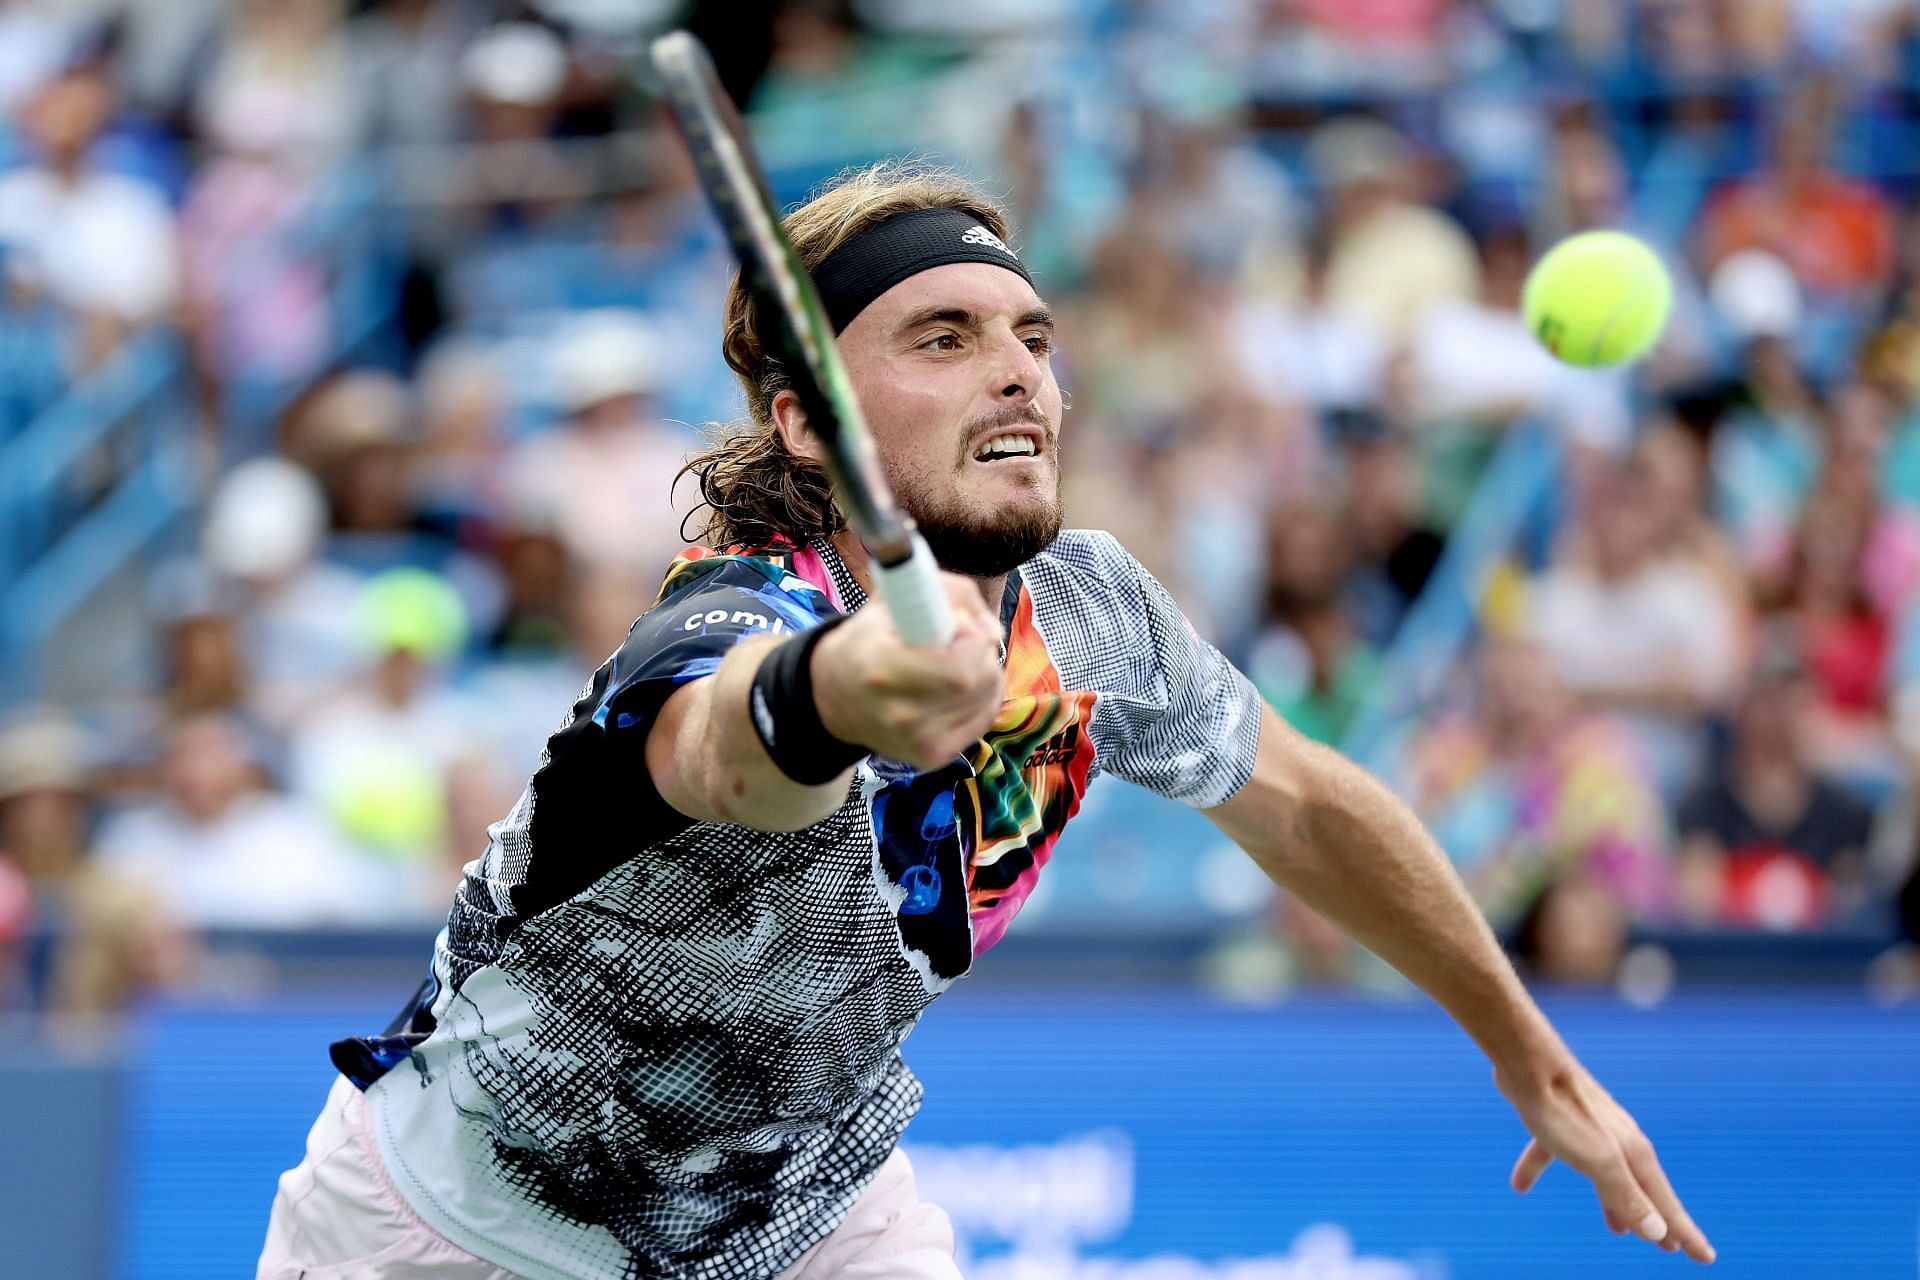 Stefanos Tsitsipas could face Medvedev in the last four.